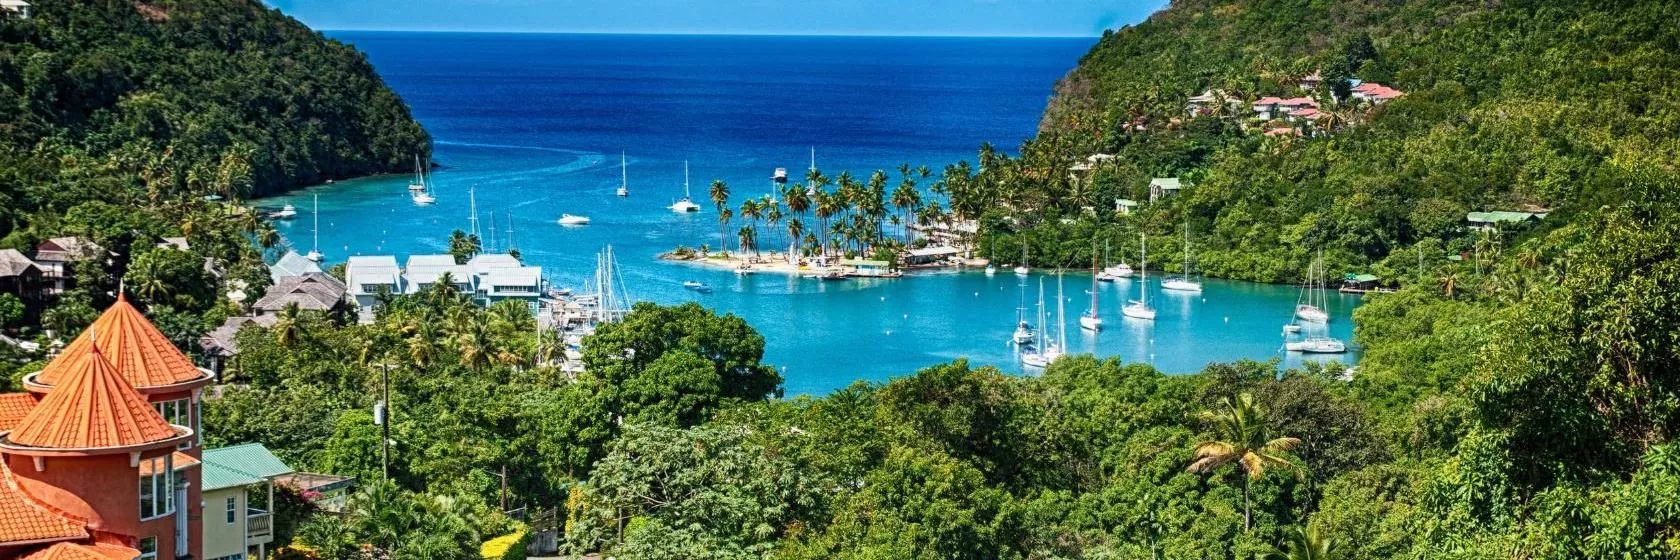 Places to Stay in magical St. Lucia